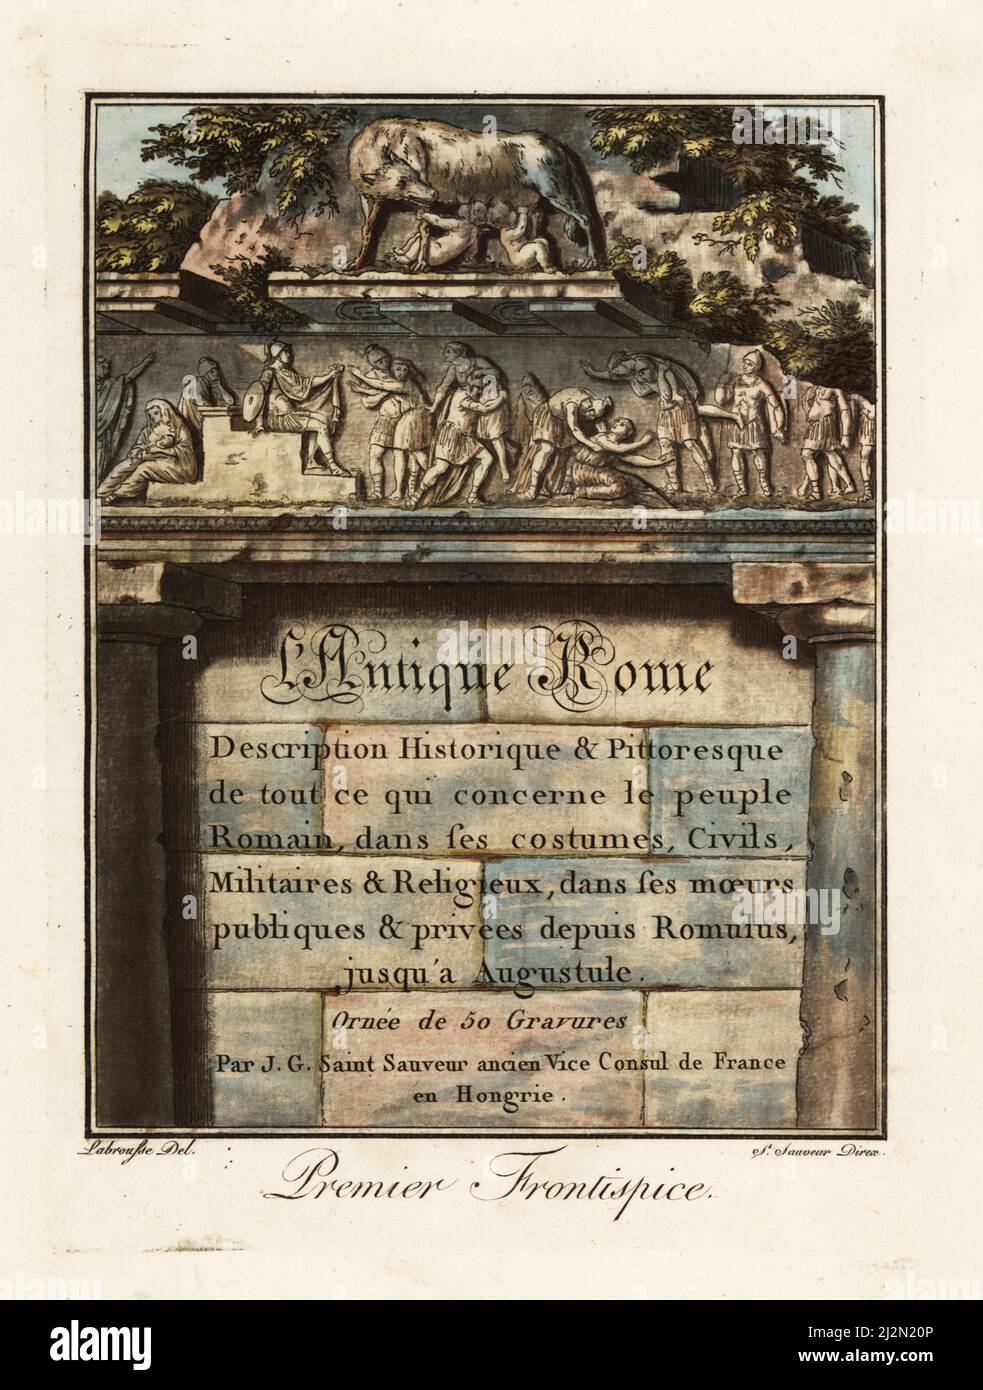 Calligraphic title page with bas-relief of scenes from Roman history showing Romulus and Remus with a wolf and the kidnap of the Sabine women. Premier Frontispiece. Handcoloured copperplate drawn and engraved by L. Labrousse, artist of Bordeaux, under the direction of Jacques Grasset de Saint-Sauveur from his L’antique Rome, ou description historique et pittoresque, Ancient Rome, or historical and picturesque description, Chez Deroy, Paris, 1796. Stock Photo